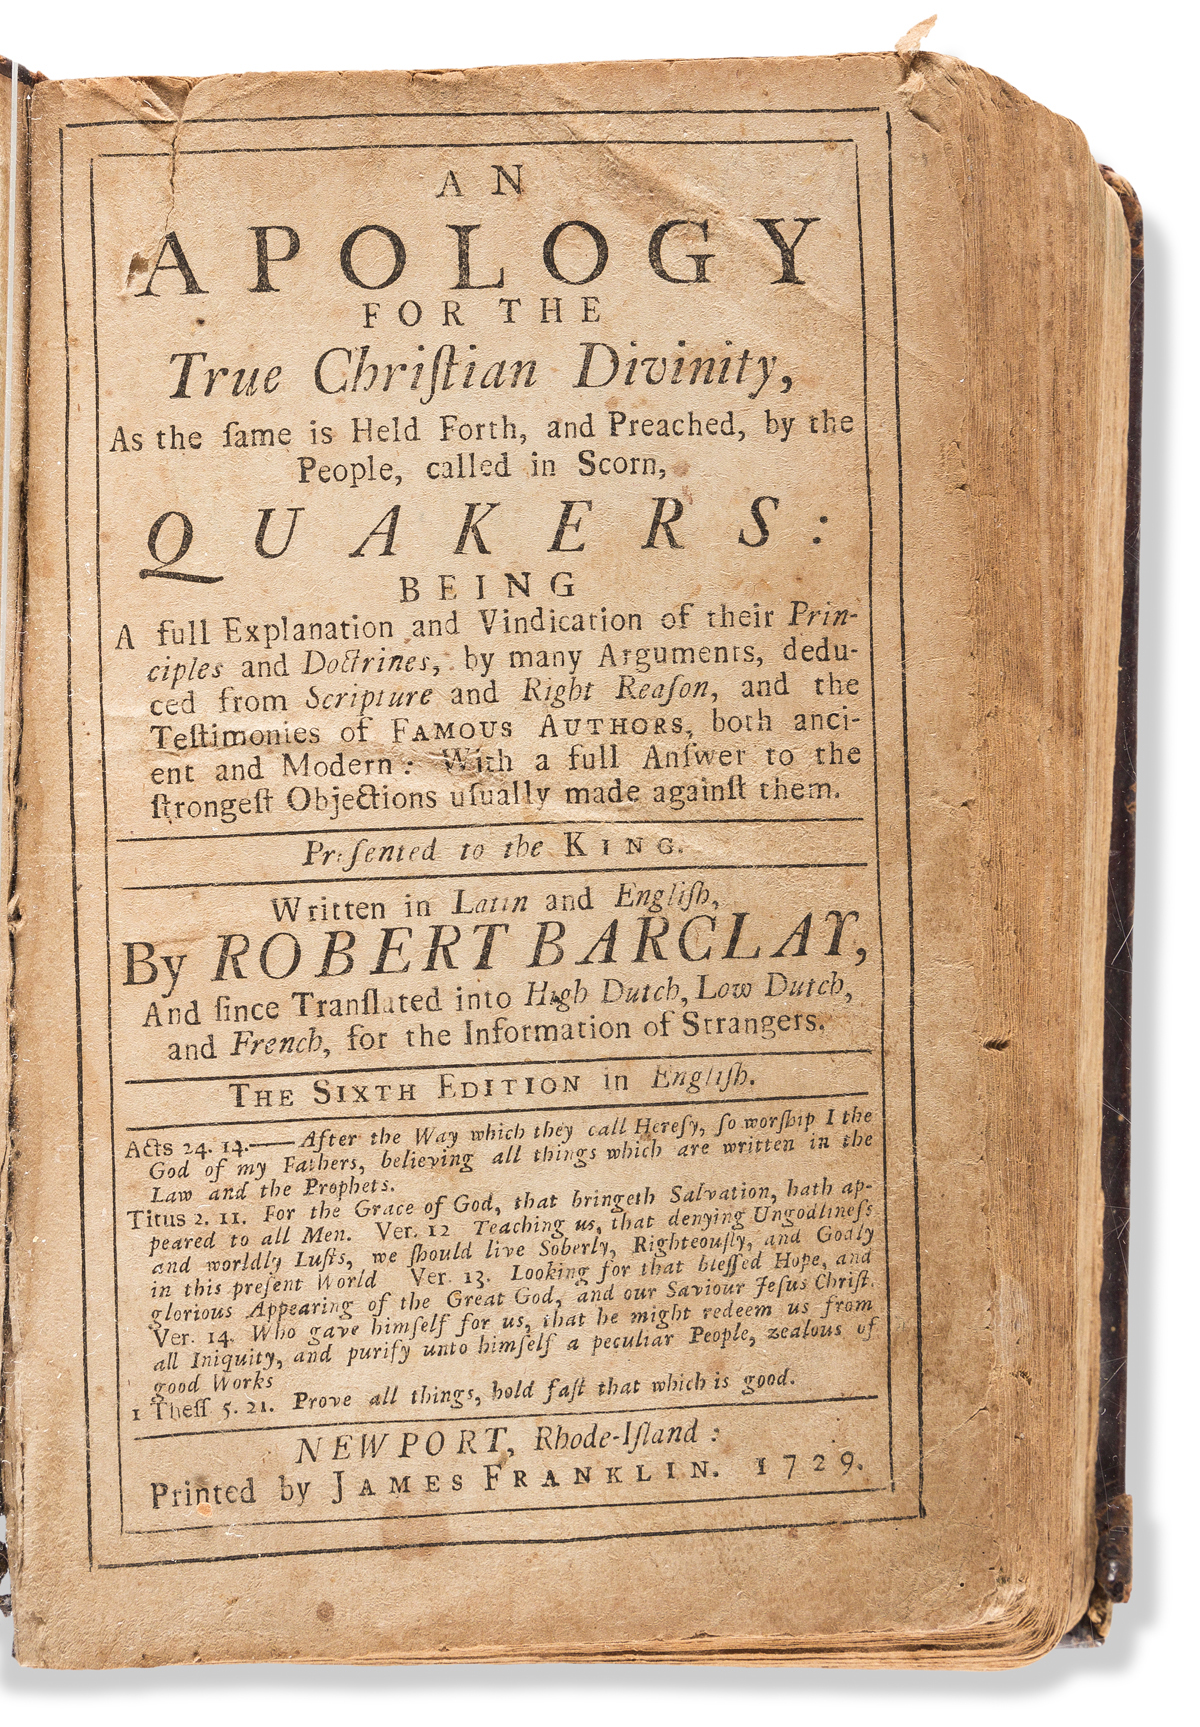 (EARLY AMERICAN IMPRINT.) Robert Barclay. An Apology for the True Christian Divinity . . . by the People, Called in Scorn, Quakers.